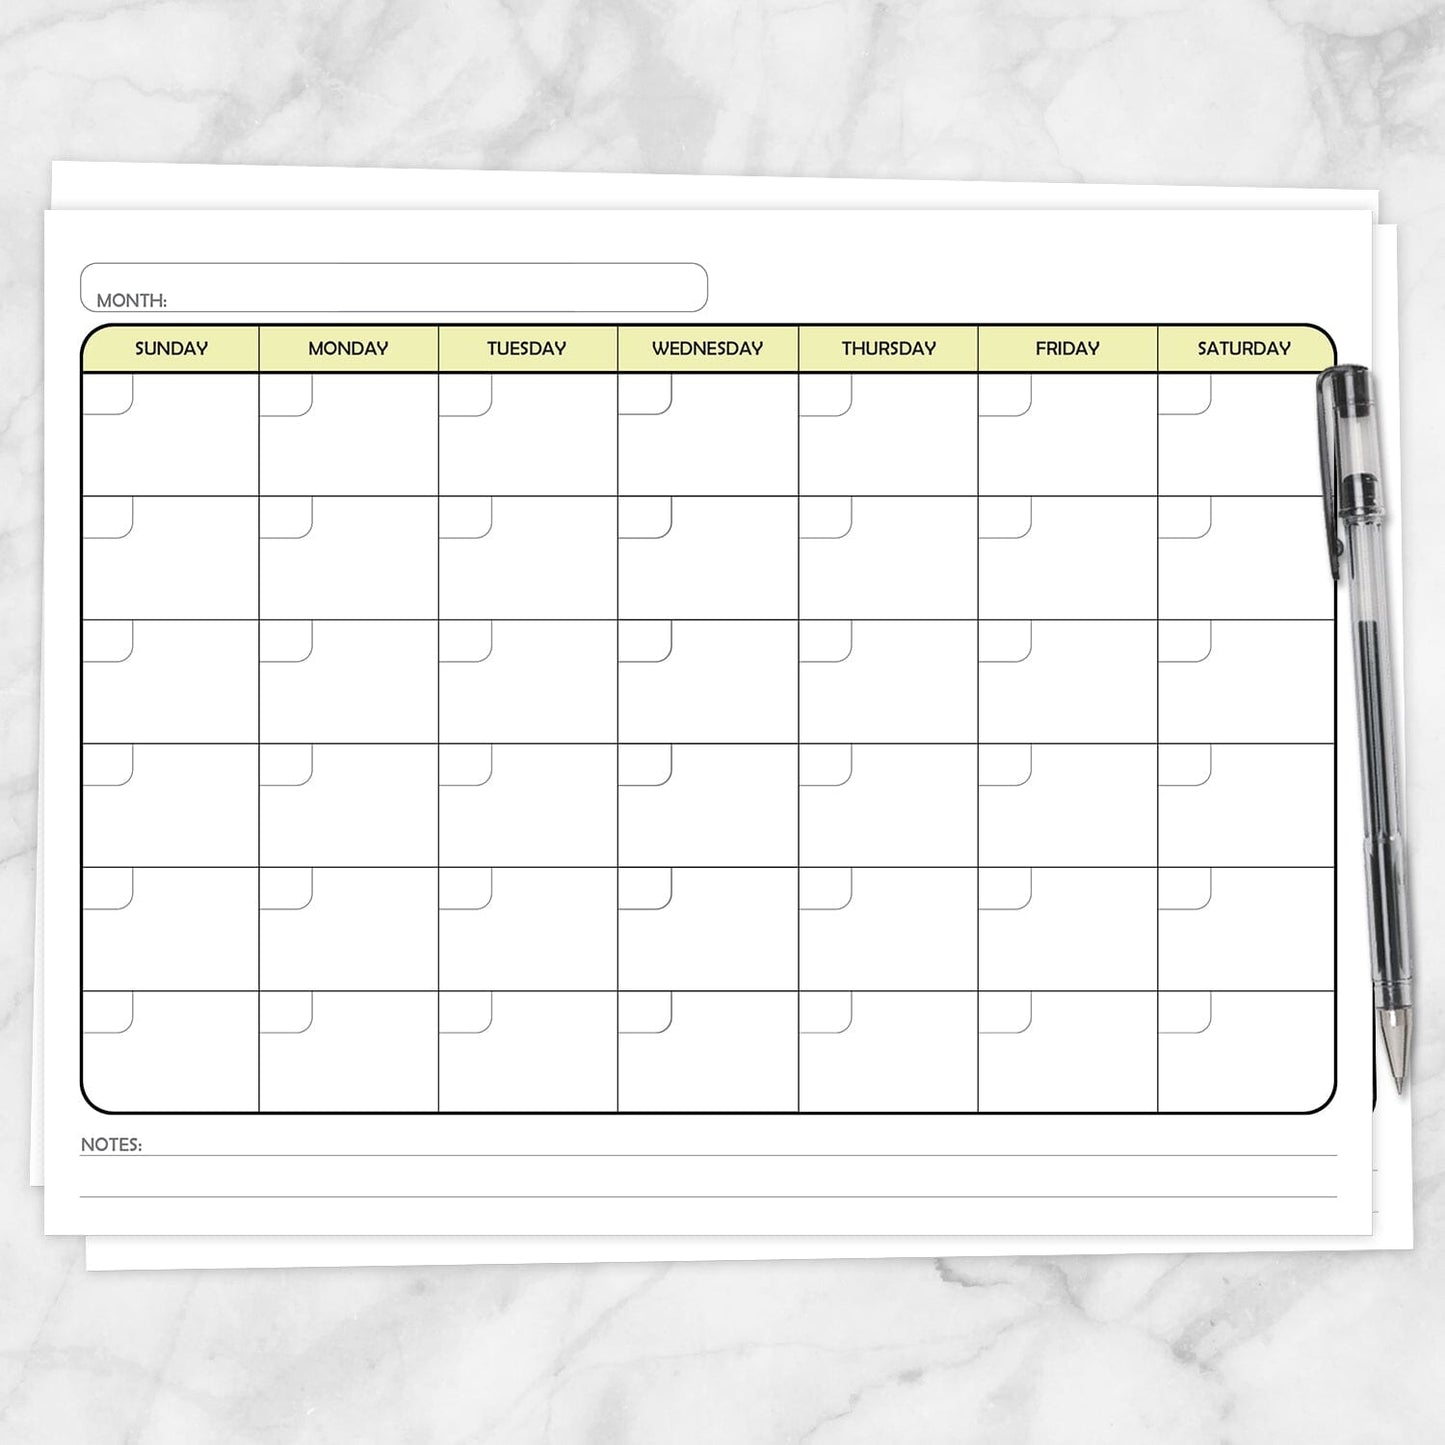 Printable Modern Yellow Blank Monthly Calendar - Full Page at Printable Planning.